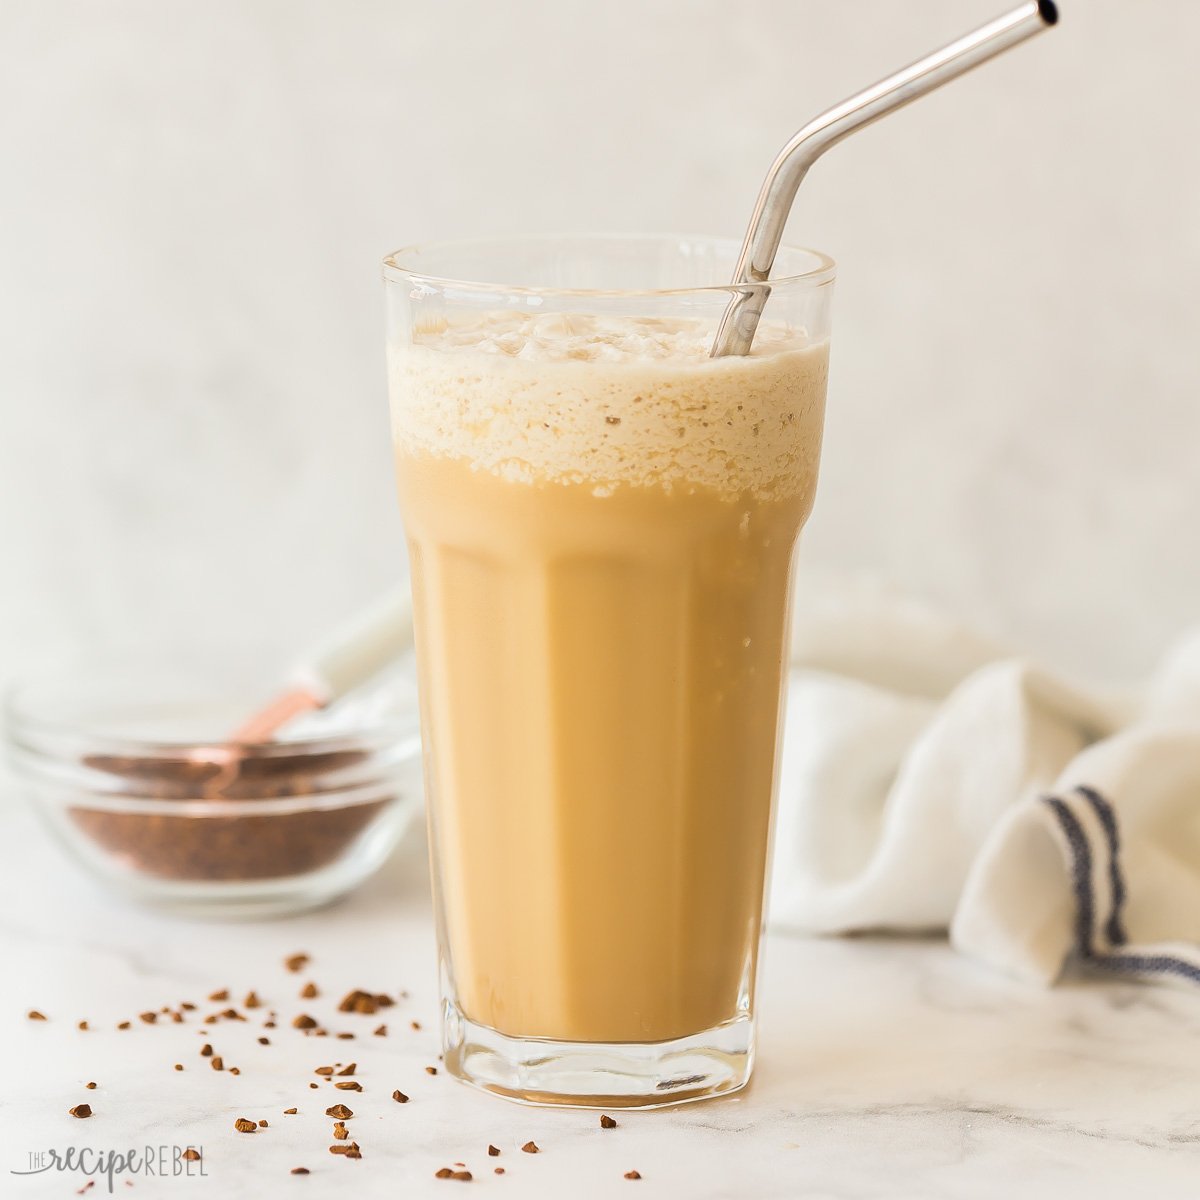 The new Nescafé all-in-one iced coffee will keep you refreshed this summer